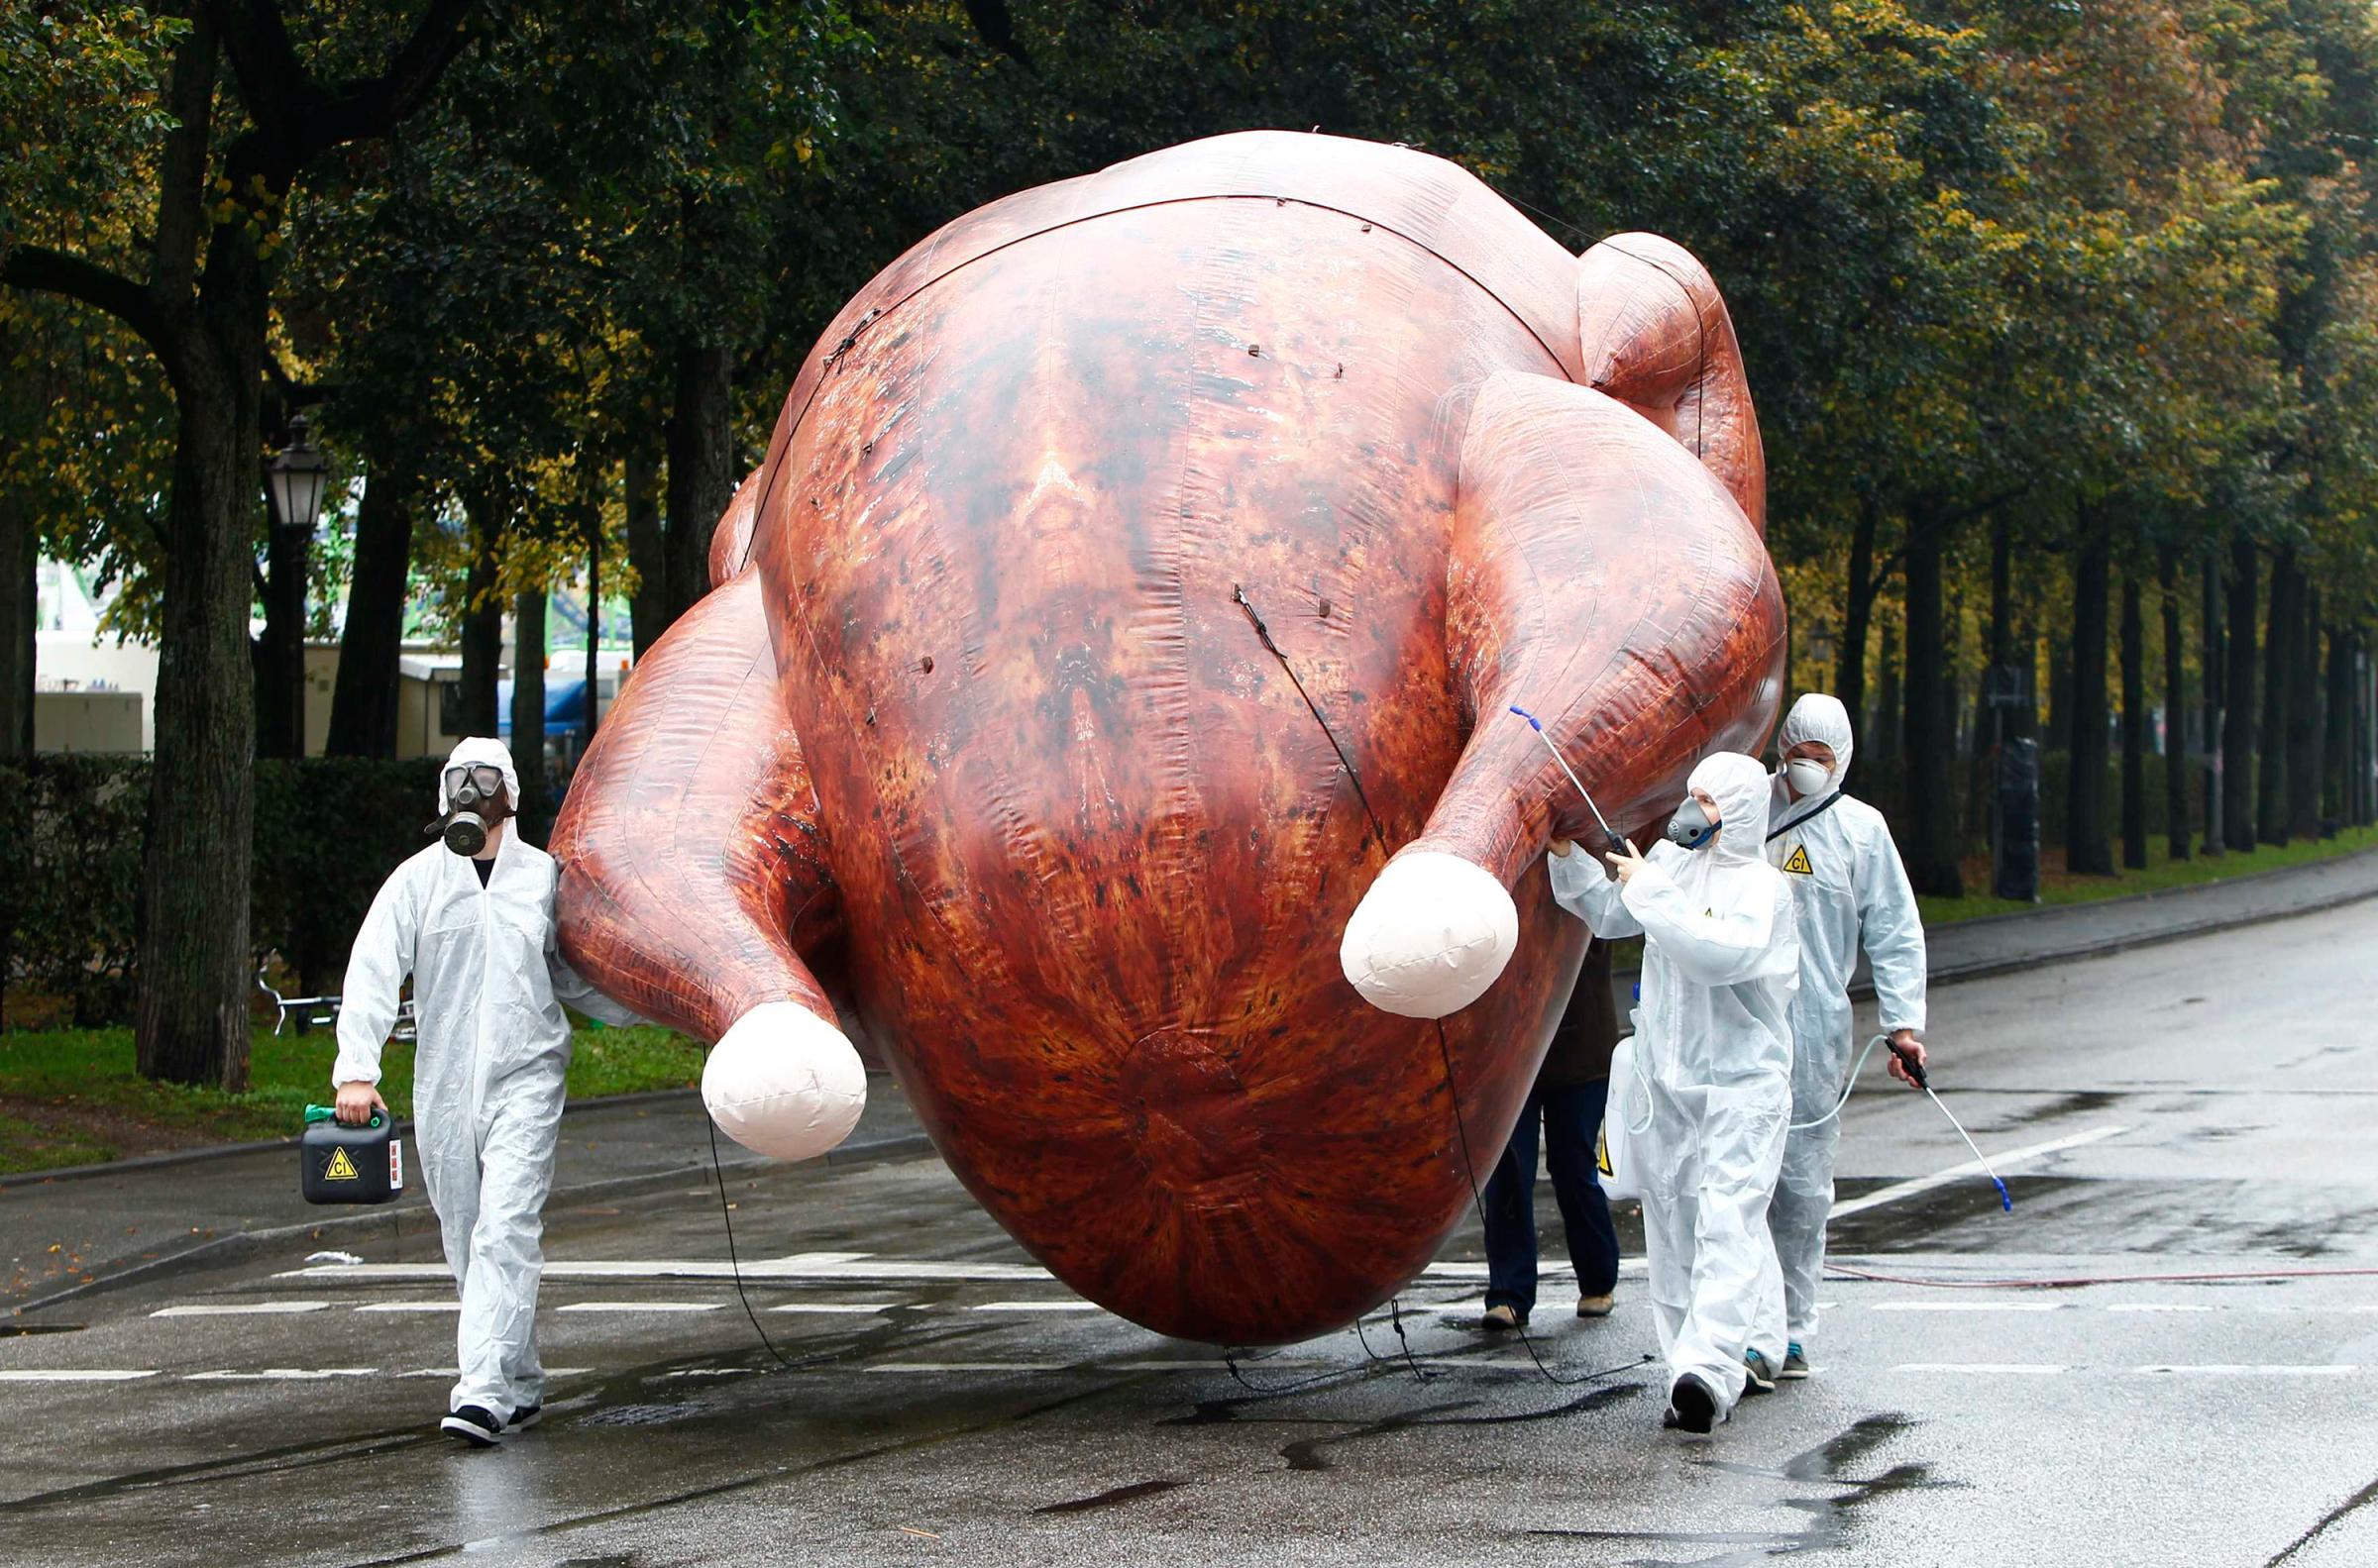 Environmental activists carry a giant inflatable chicken near Oktoberfest grounds in Munich